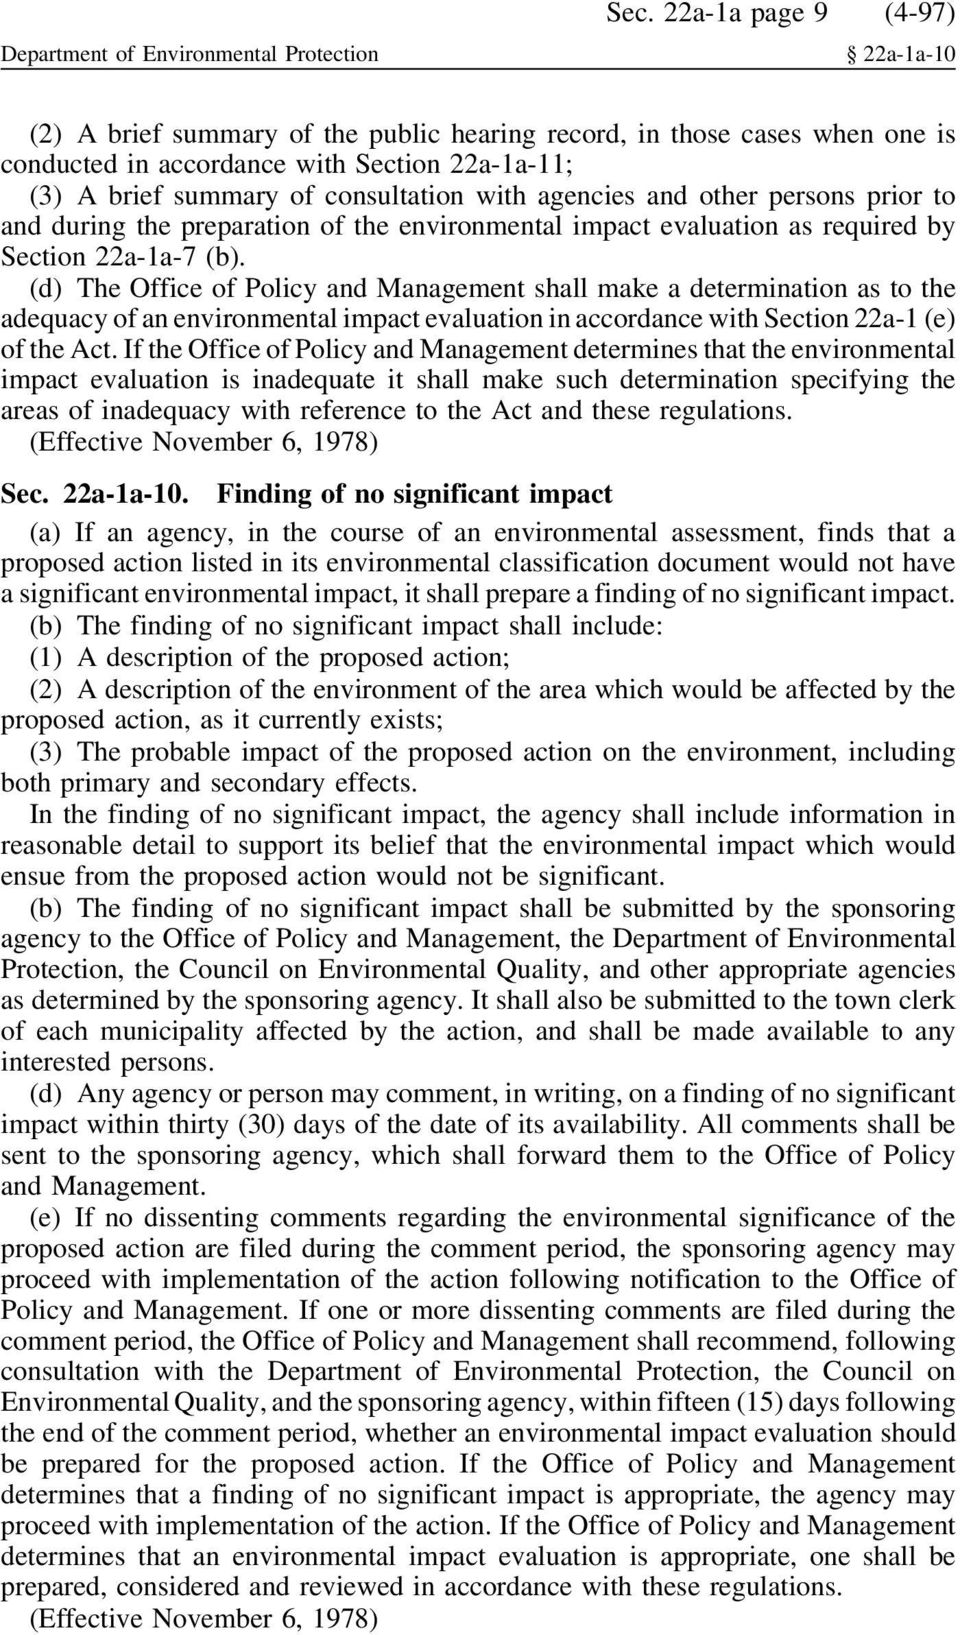 agencies and other persons prior to and during the preparation of the environmental impact evaluation as required by Section 22a-1a-7 (b).